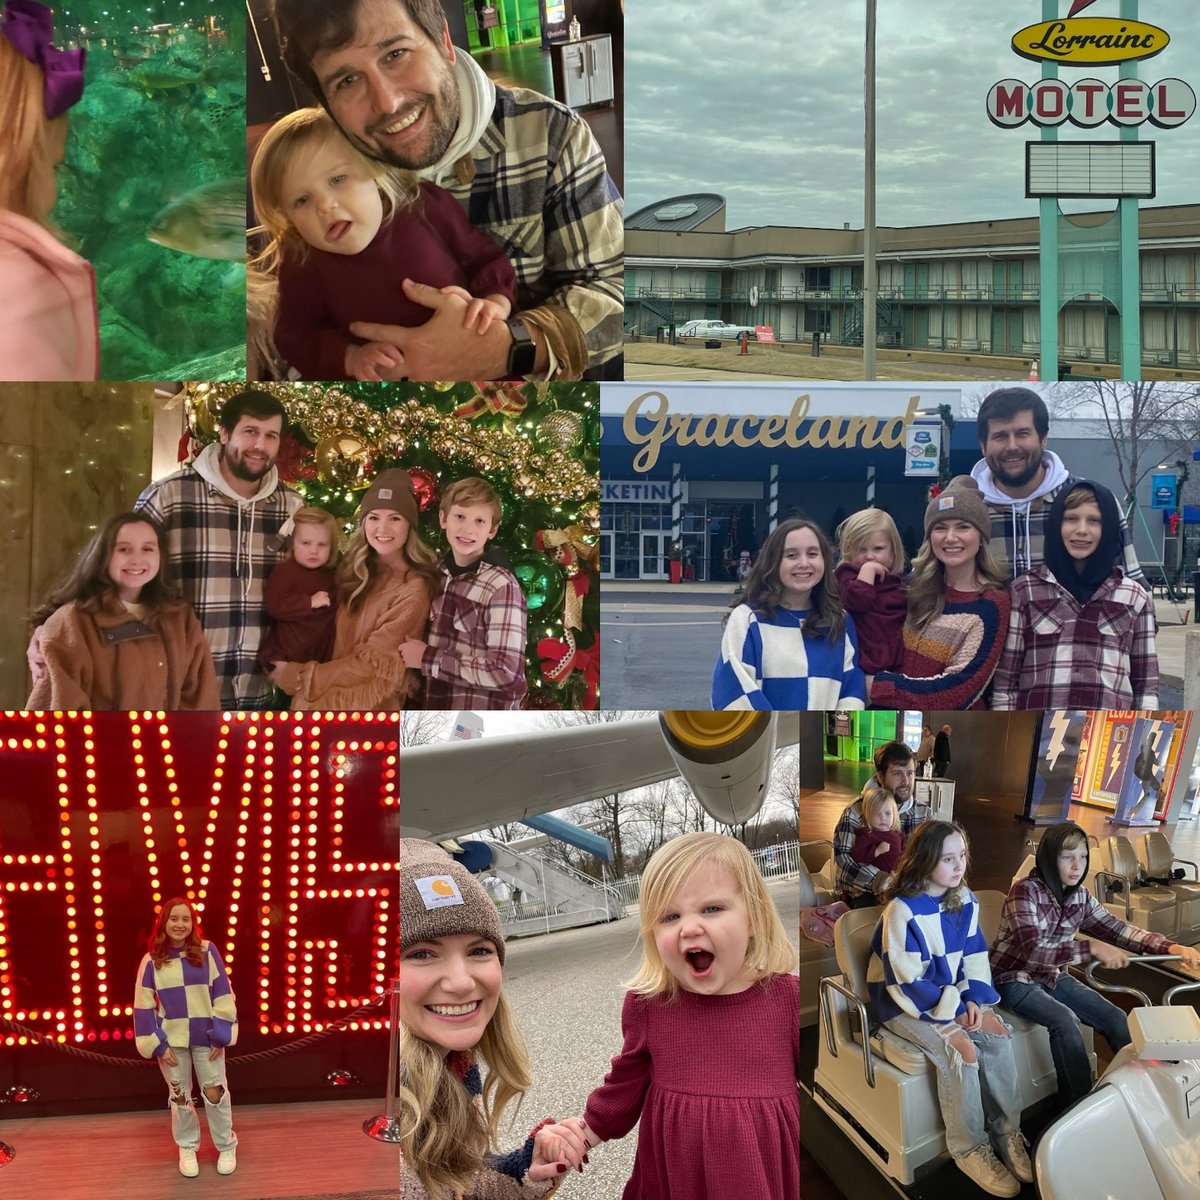 Family Vacations > Presents... Hopefully starting a new family Christmas tradition. Had fun with my crew in Memphis this weekend. #LovemyCrew